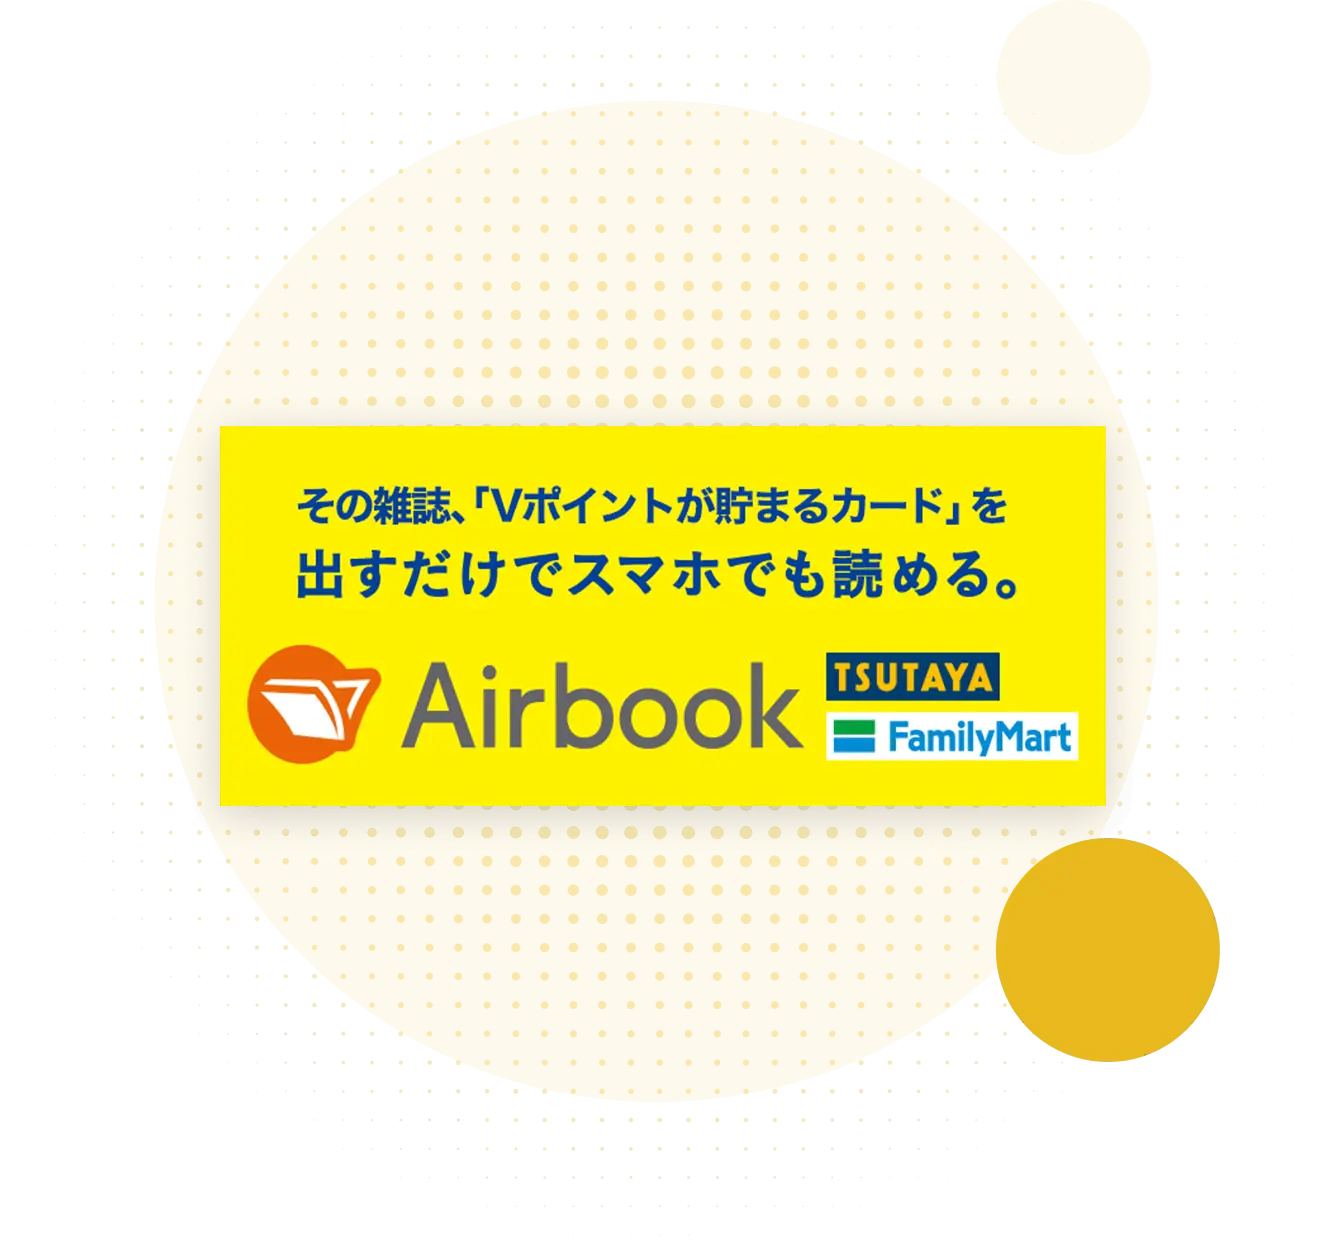 Airbook image